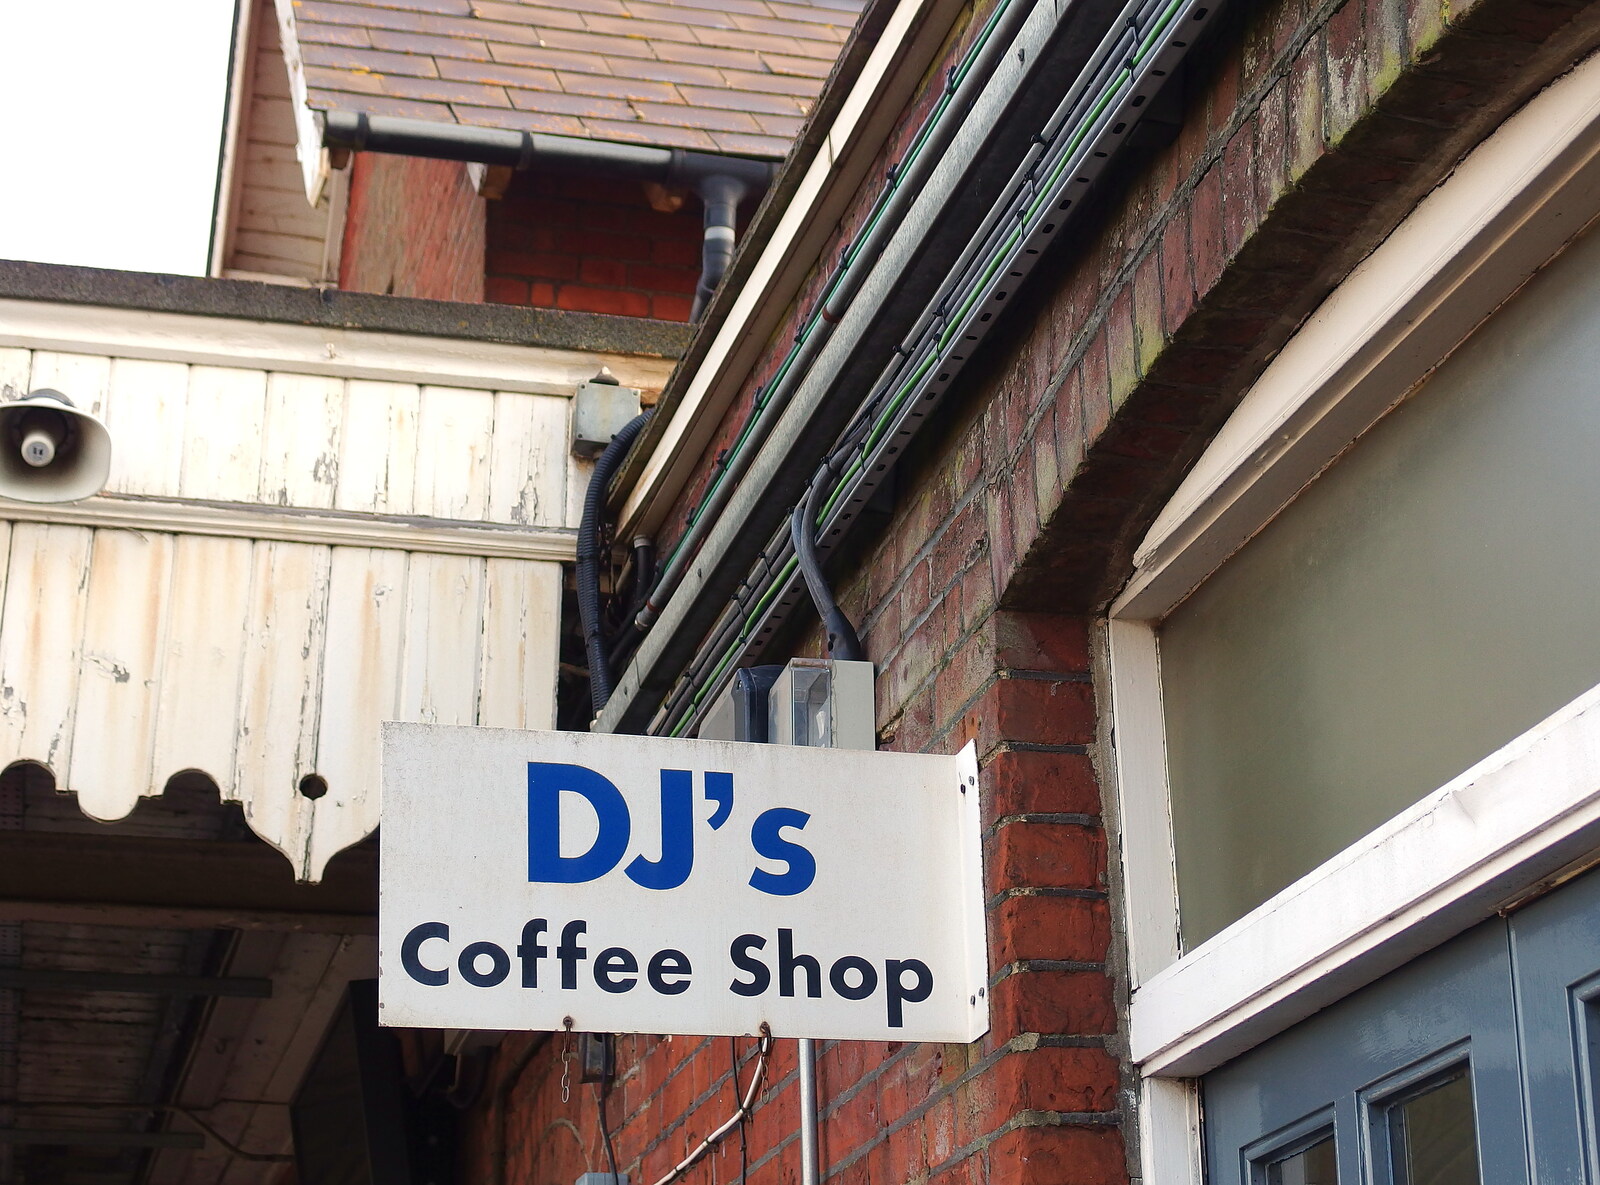 DJ's coffee shop is no more from A Trainey Sort of Week, Liverpool Street, City of London - 3rd April 2014